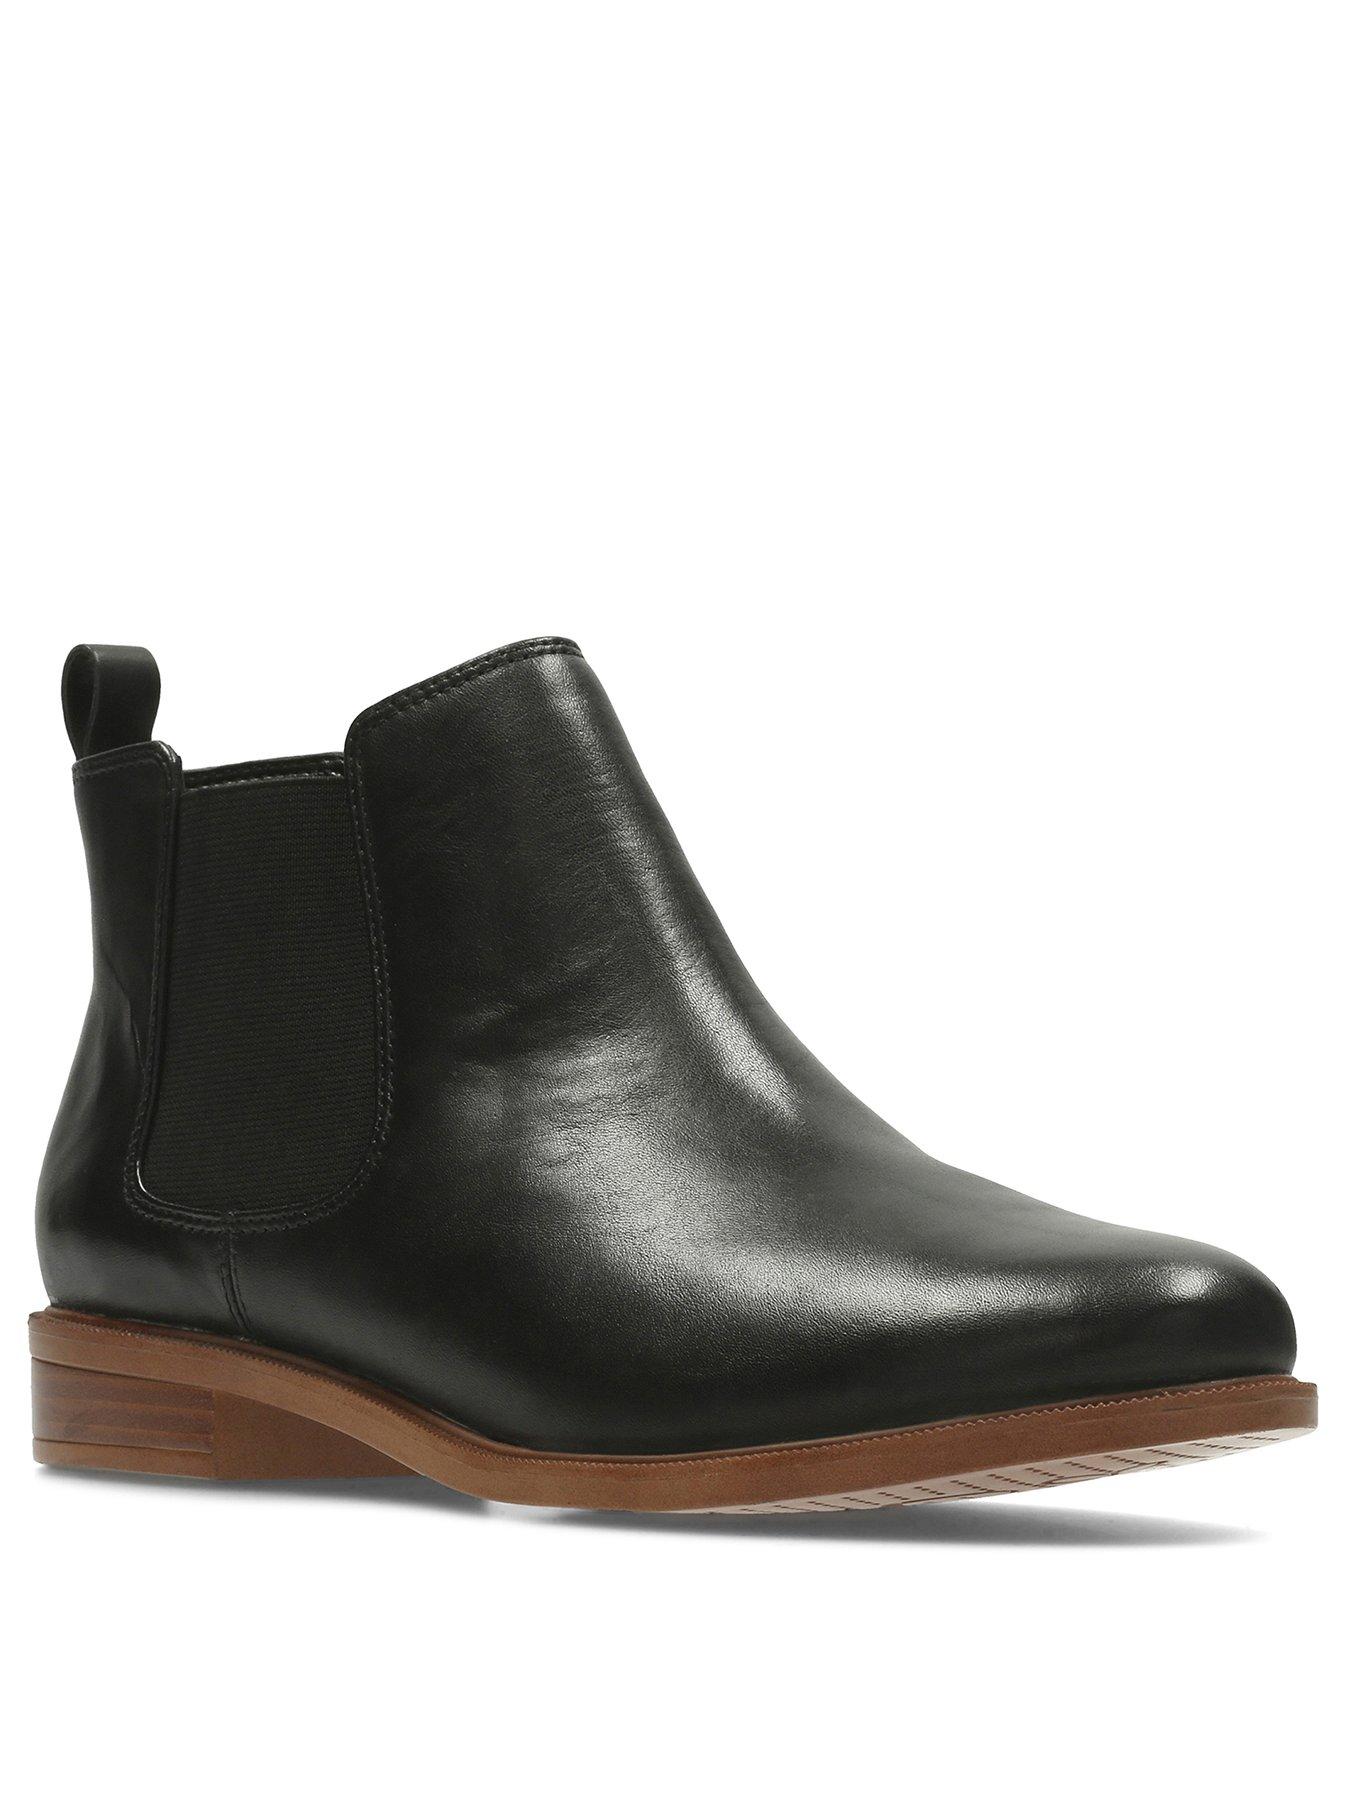 clarks wide fit black ankle boots